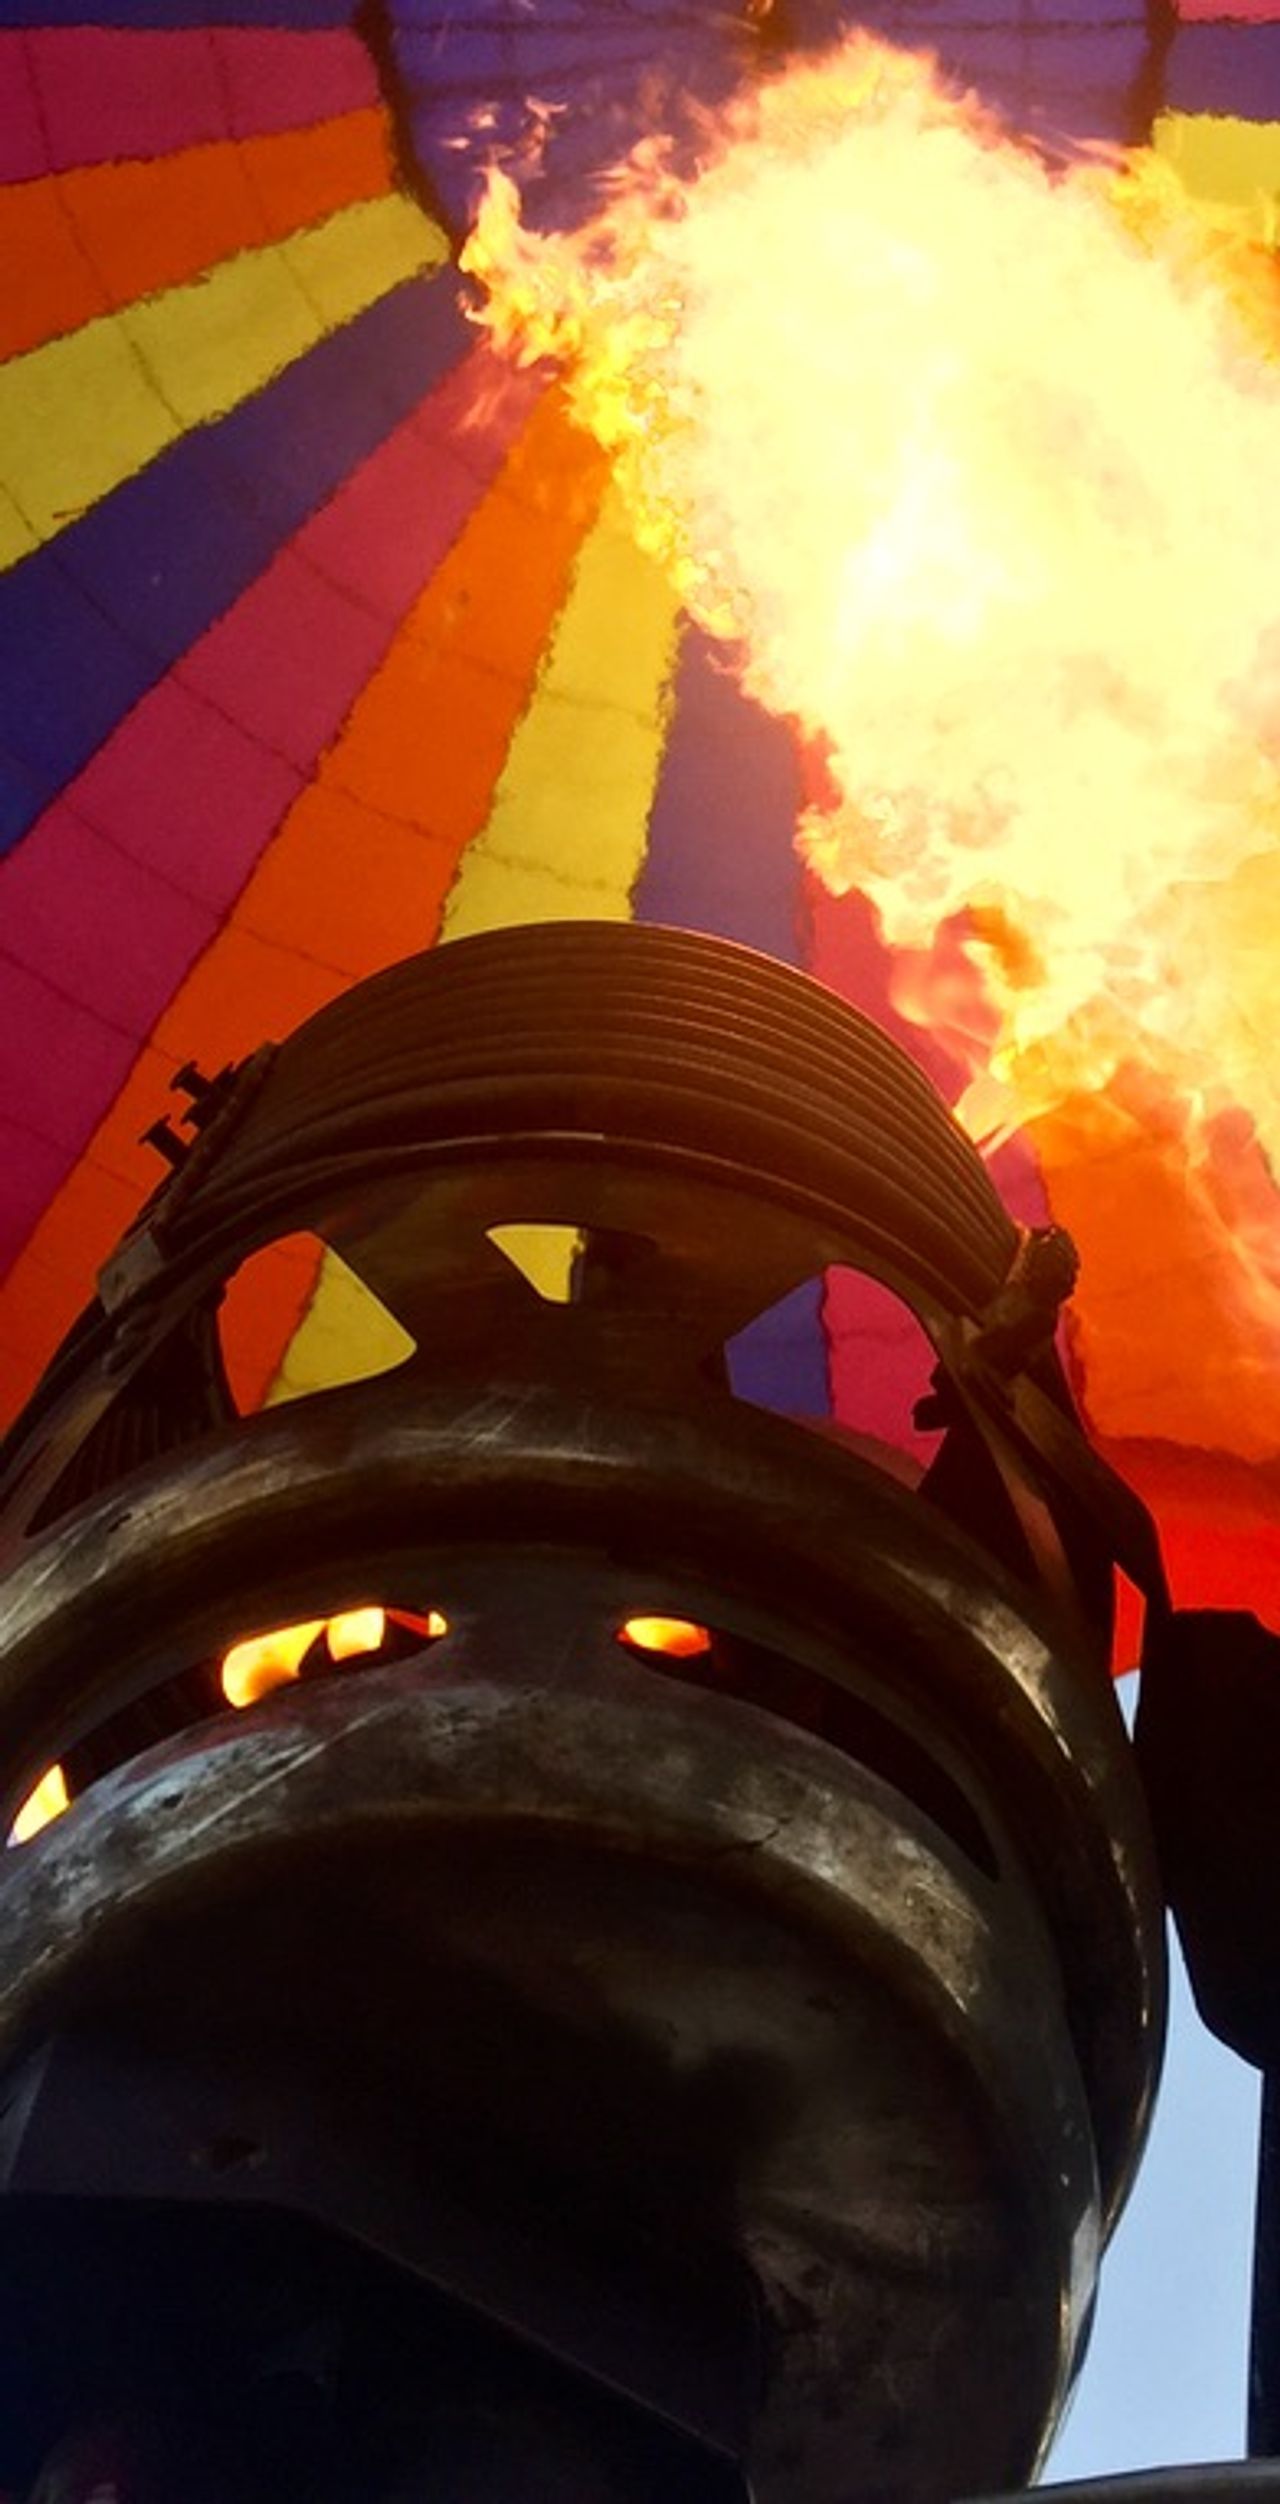 Close-up of a flame emitting heat into a hot air balloon.